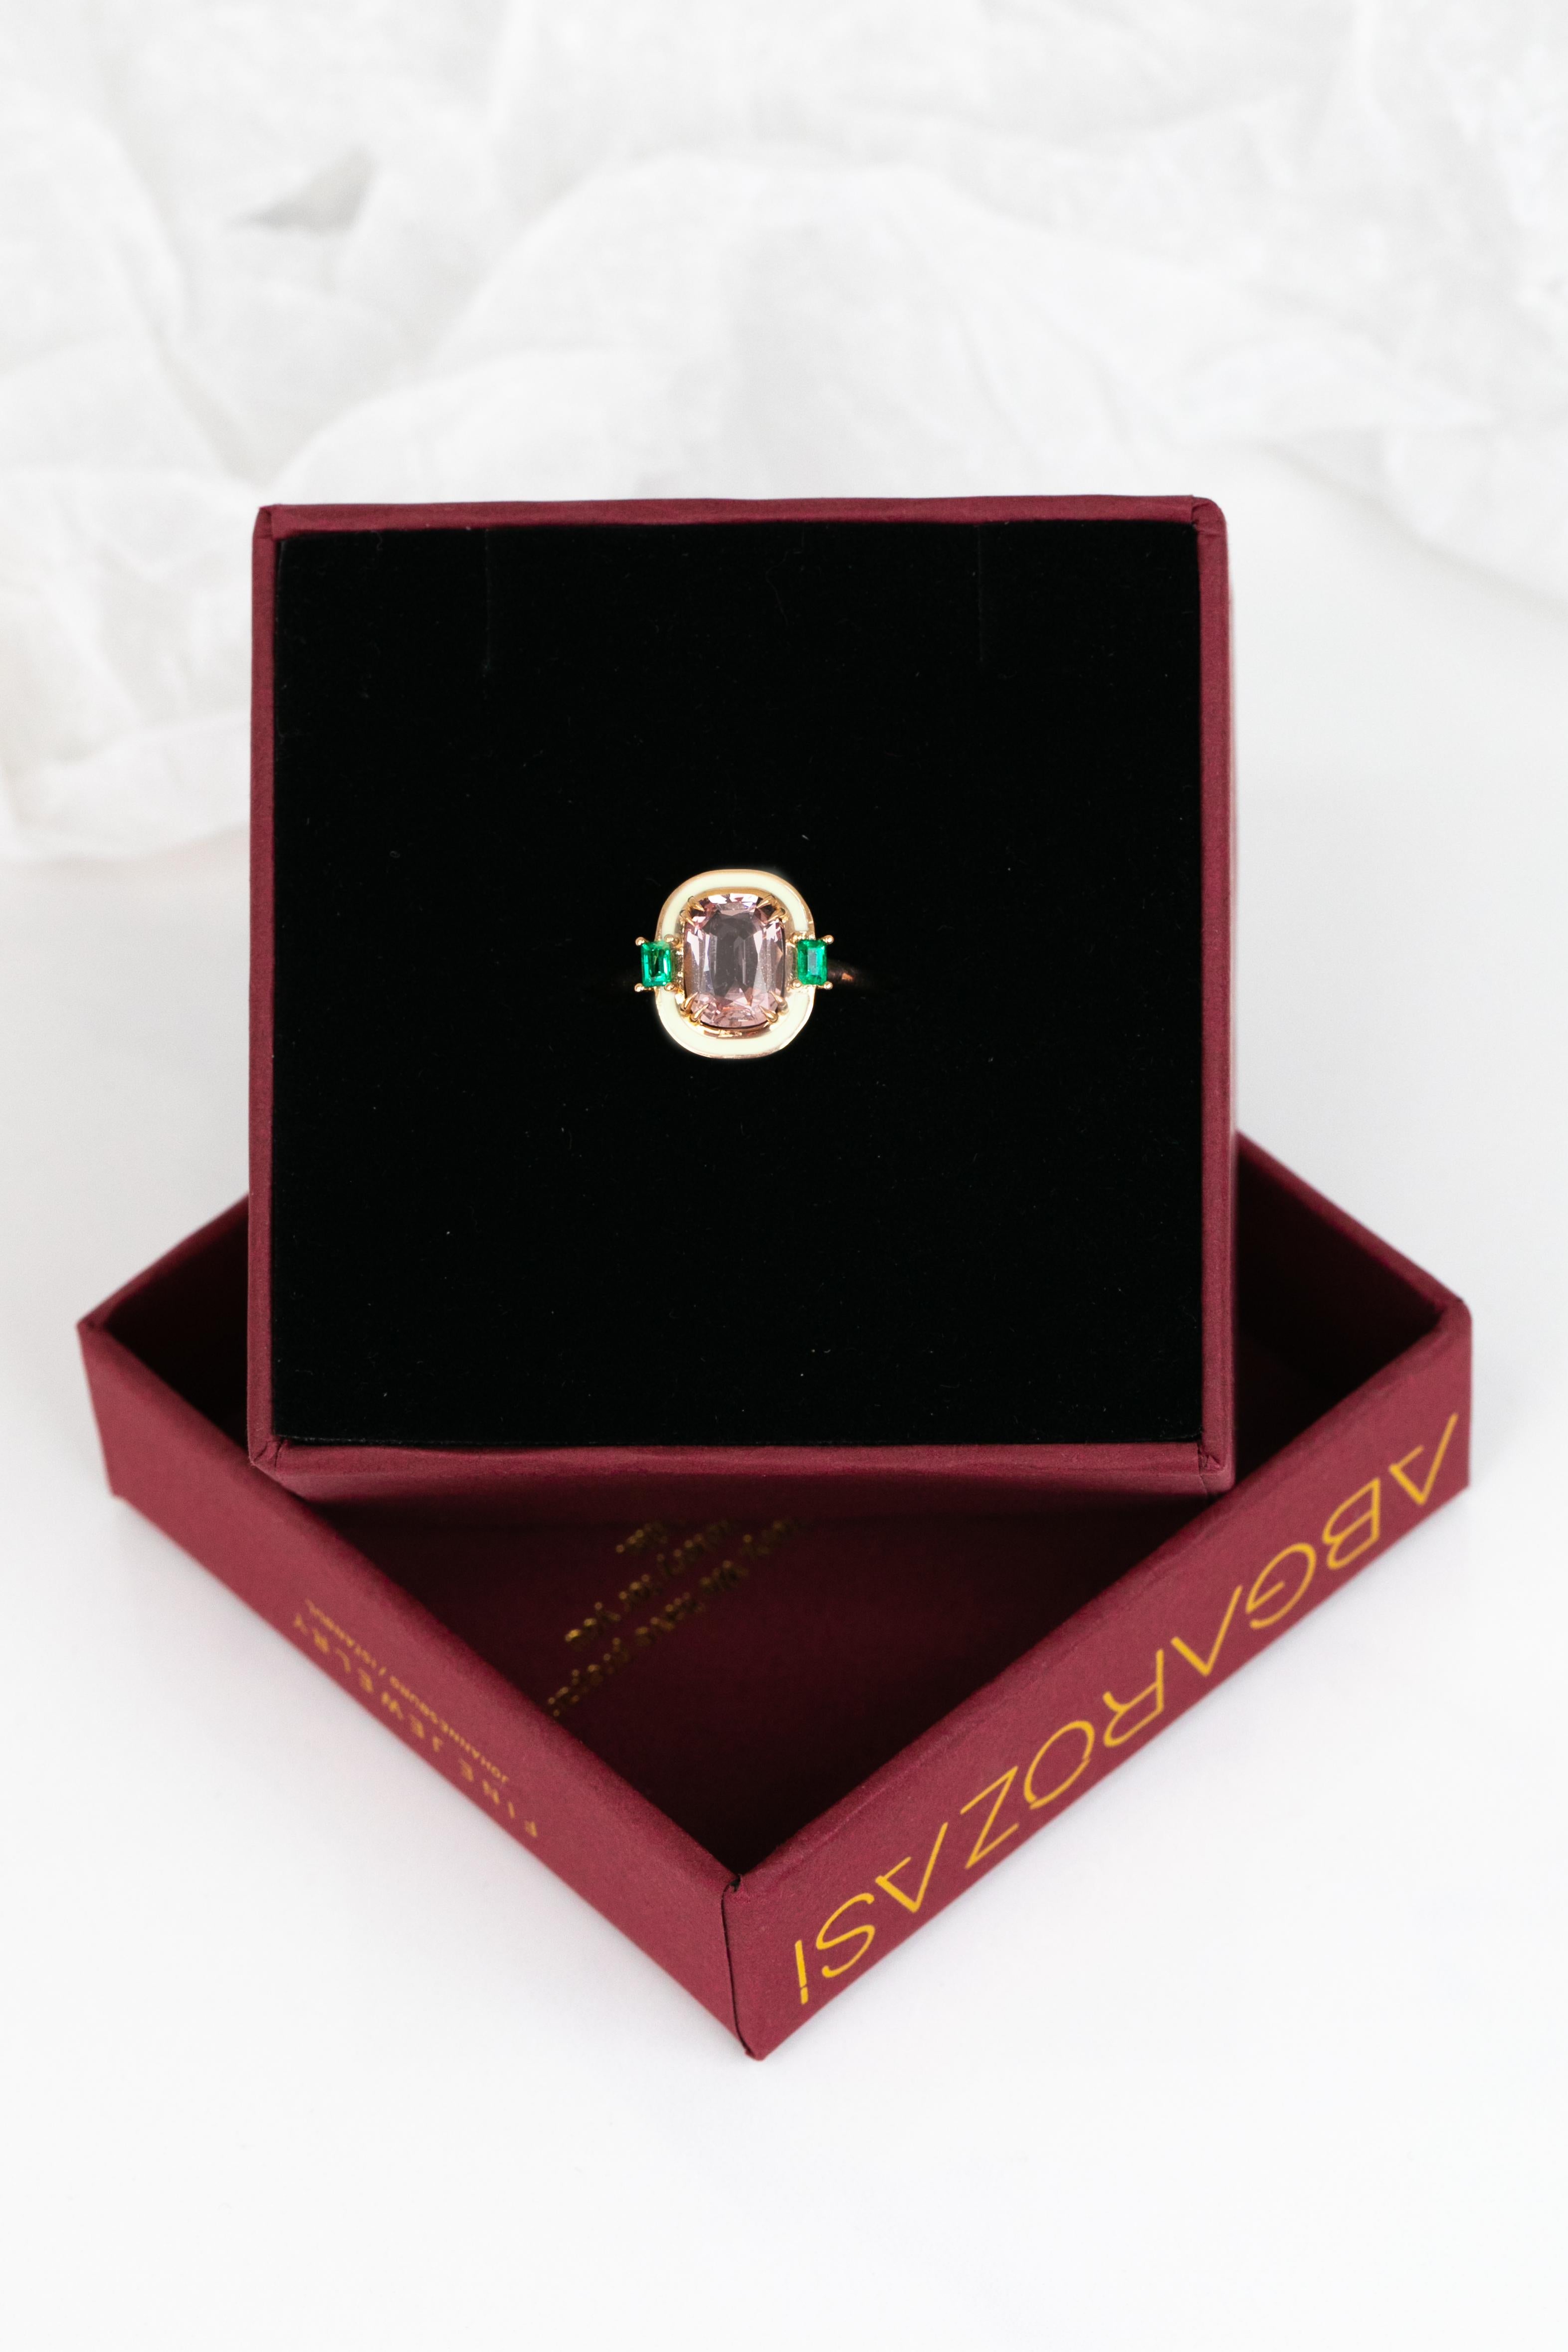 For Sale:  Artdeco Style, Enameled 14k Gold Morganite and Emerald Cocktail Ring 4